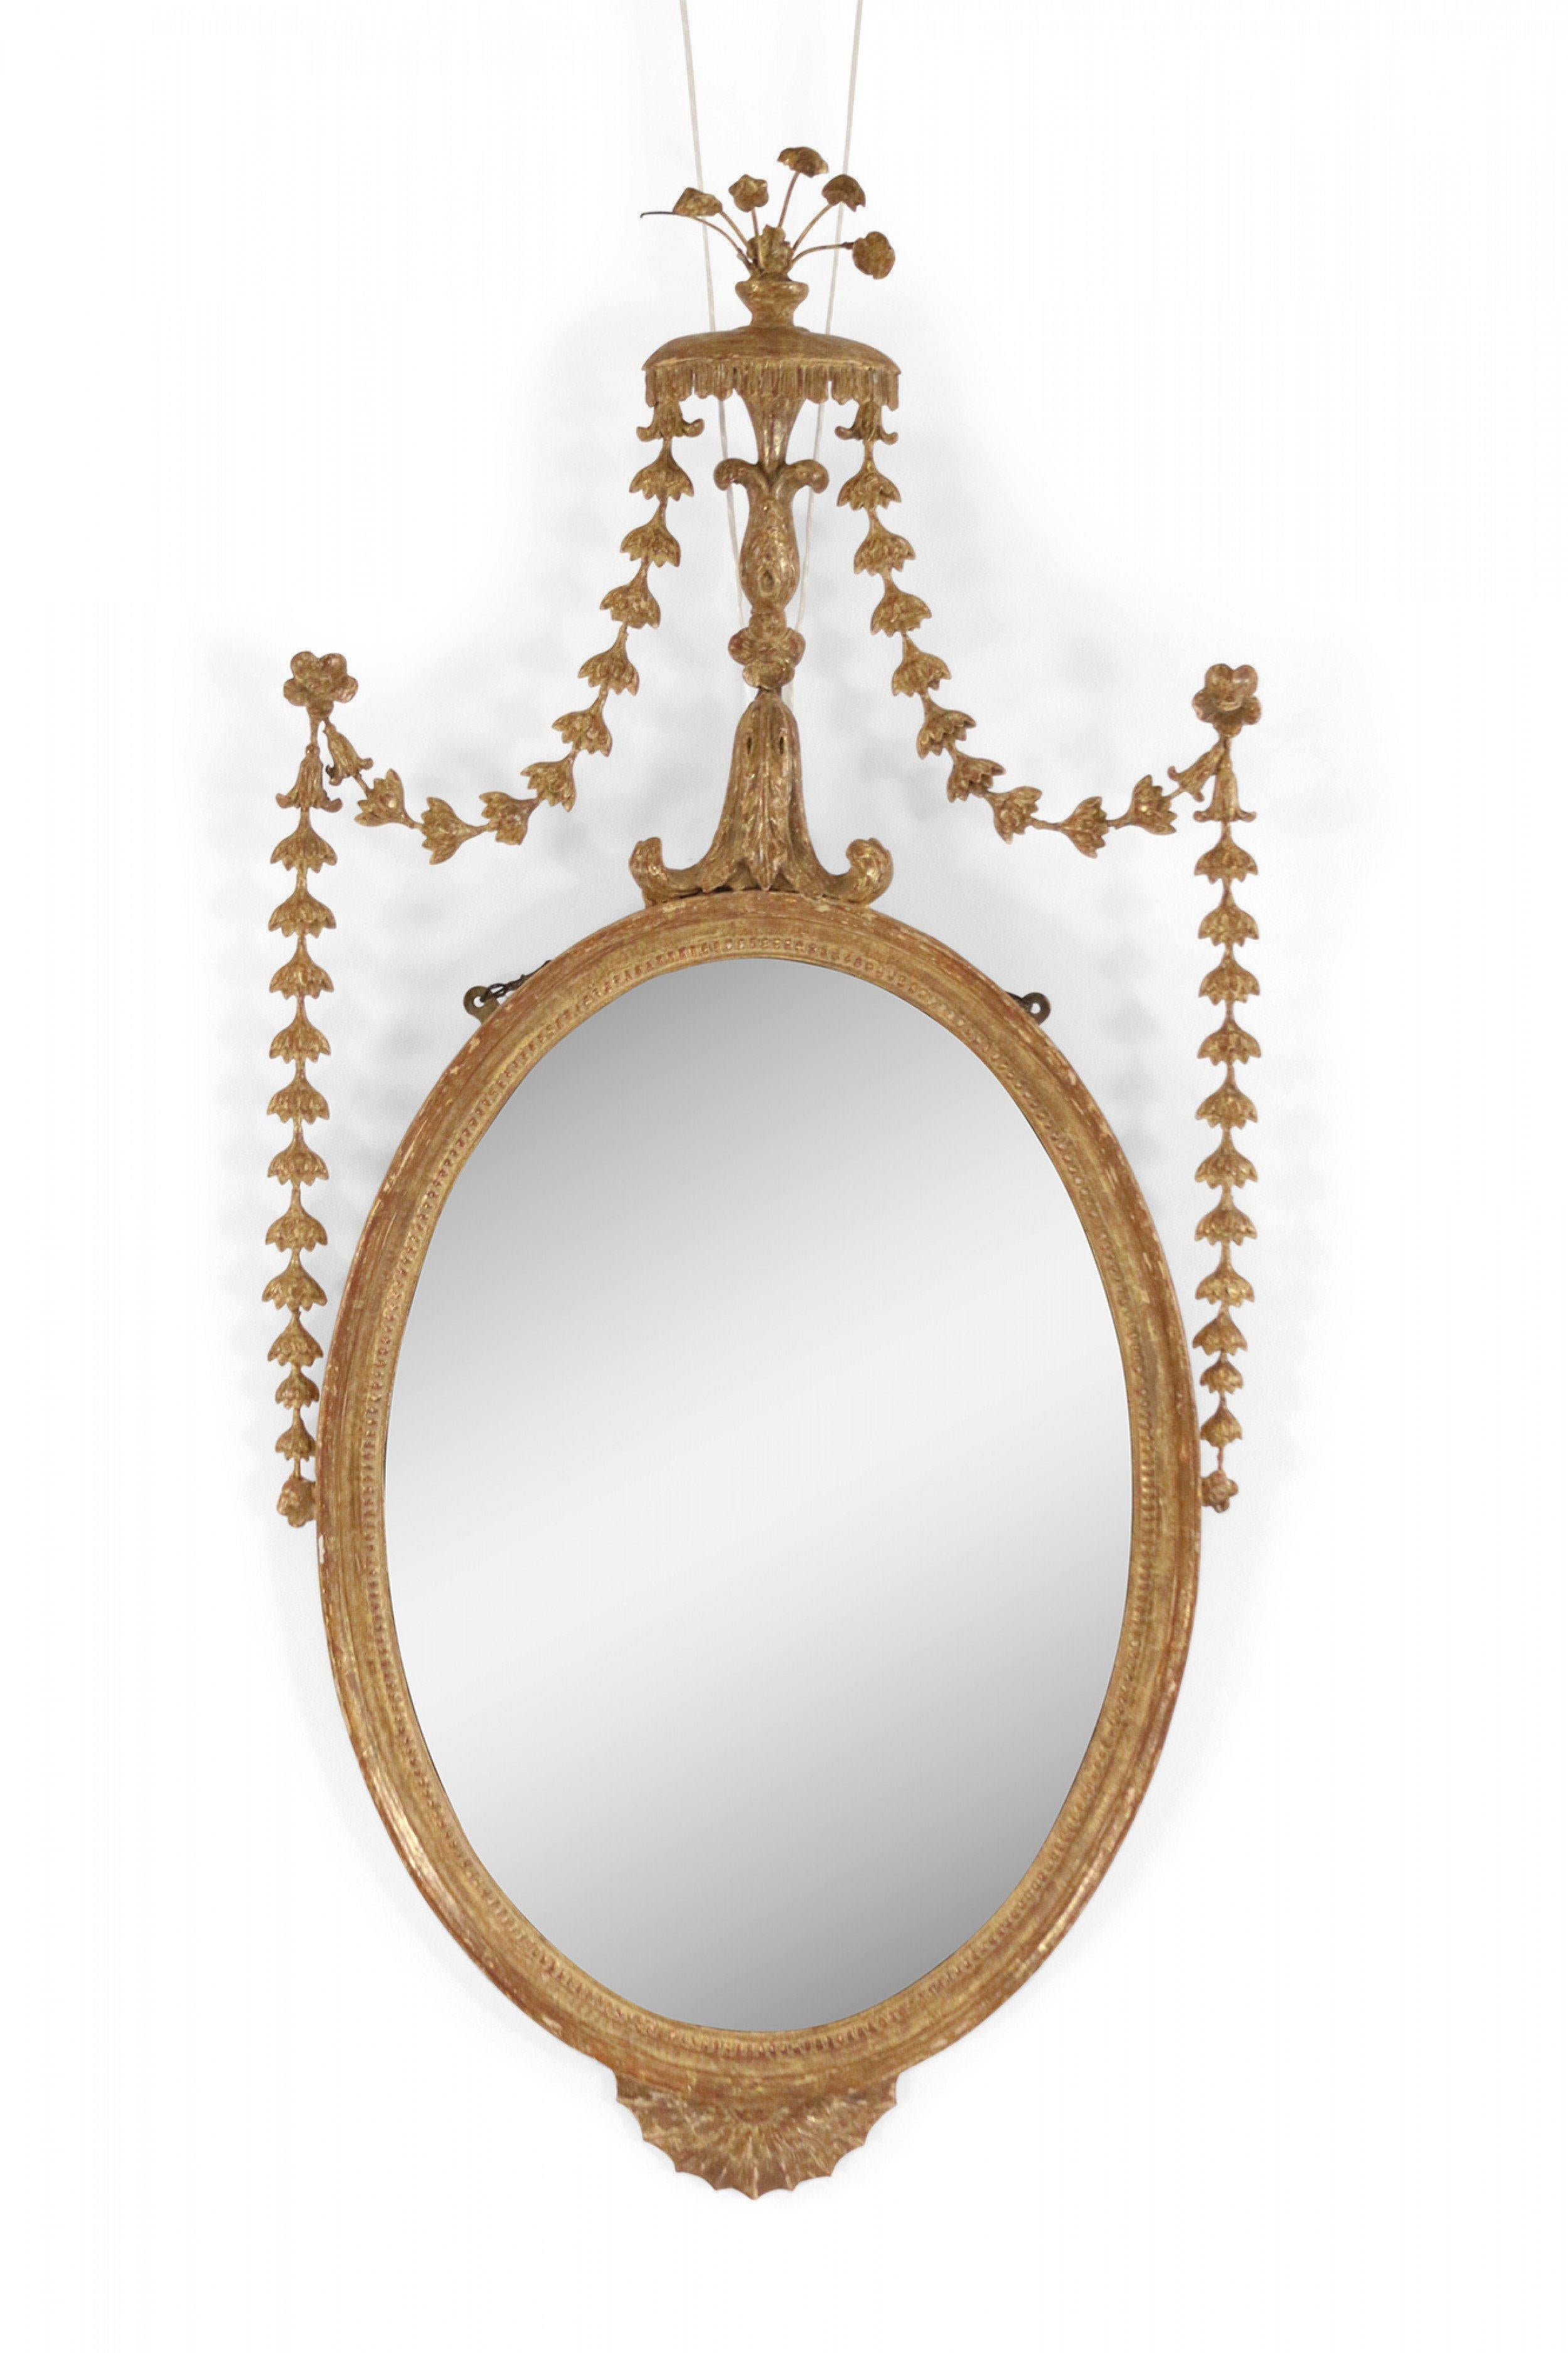 Pair of English Adam style giltwood wall mirrors with carved oval frames and flower spray pediments.